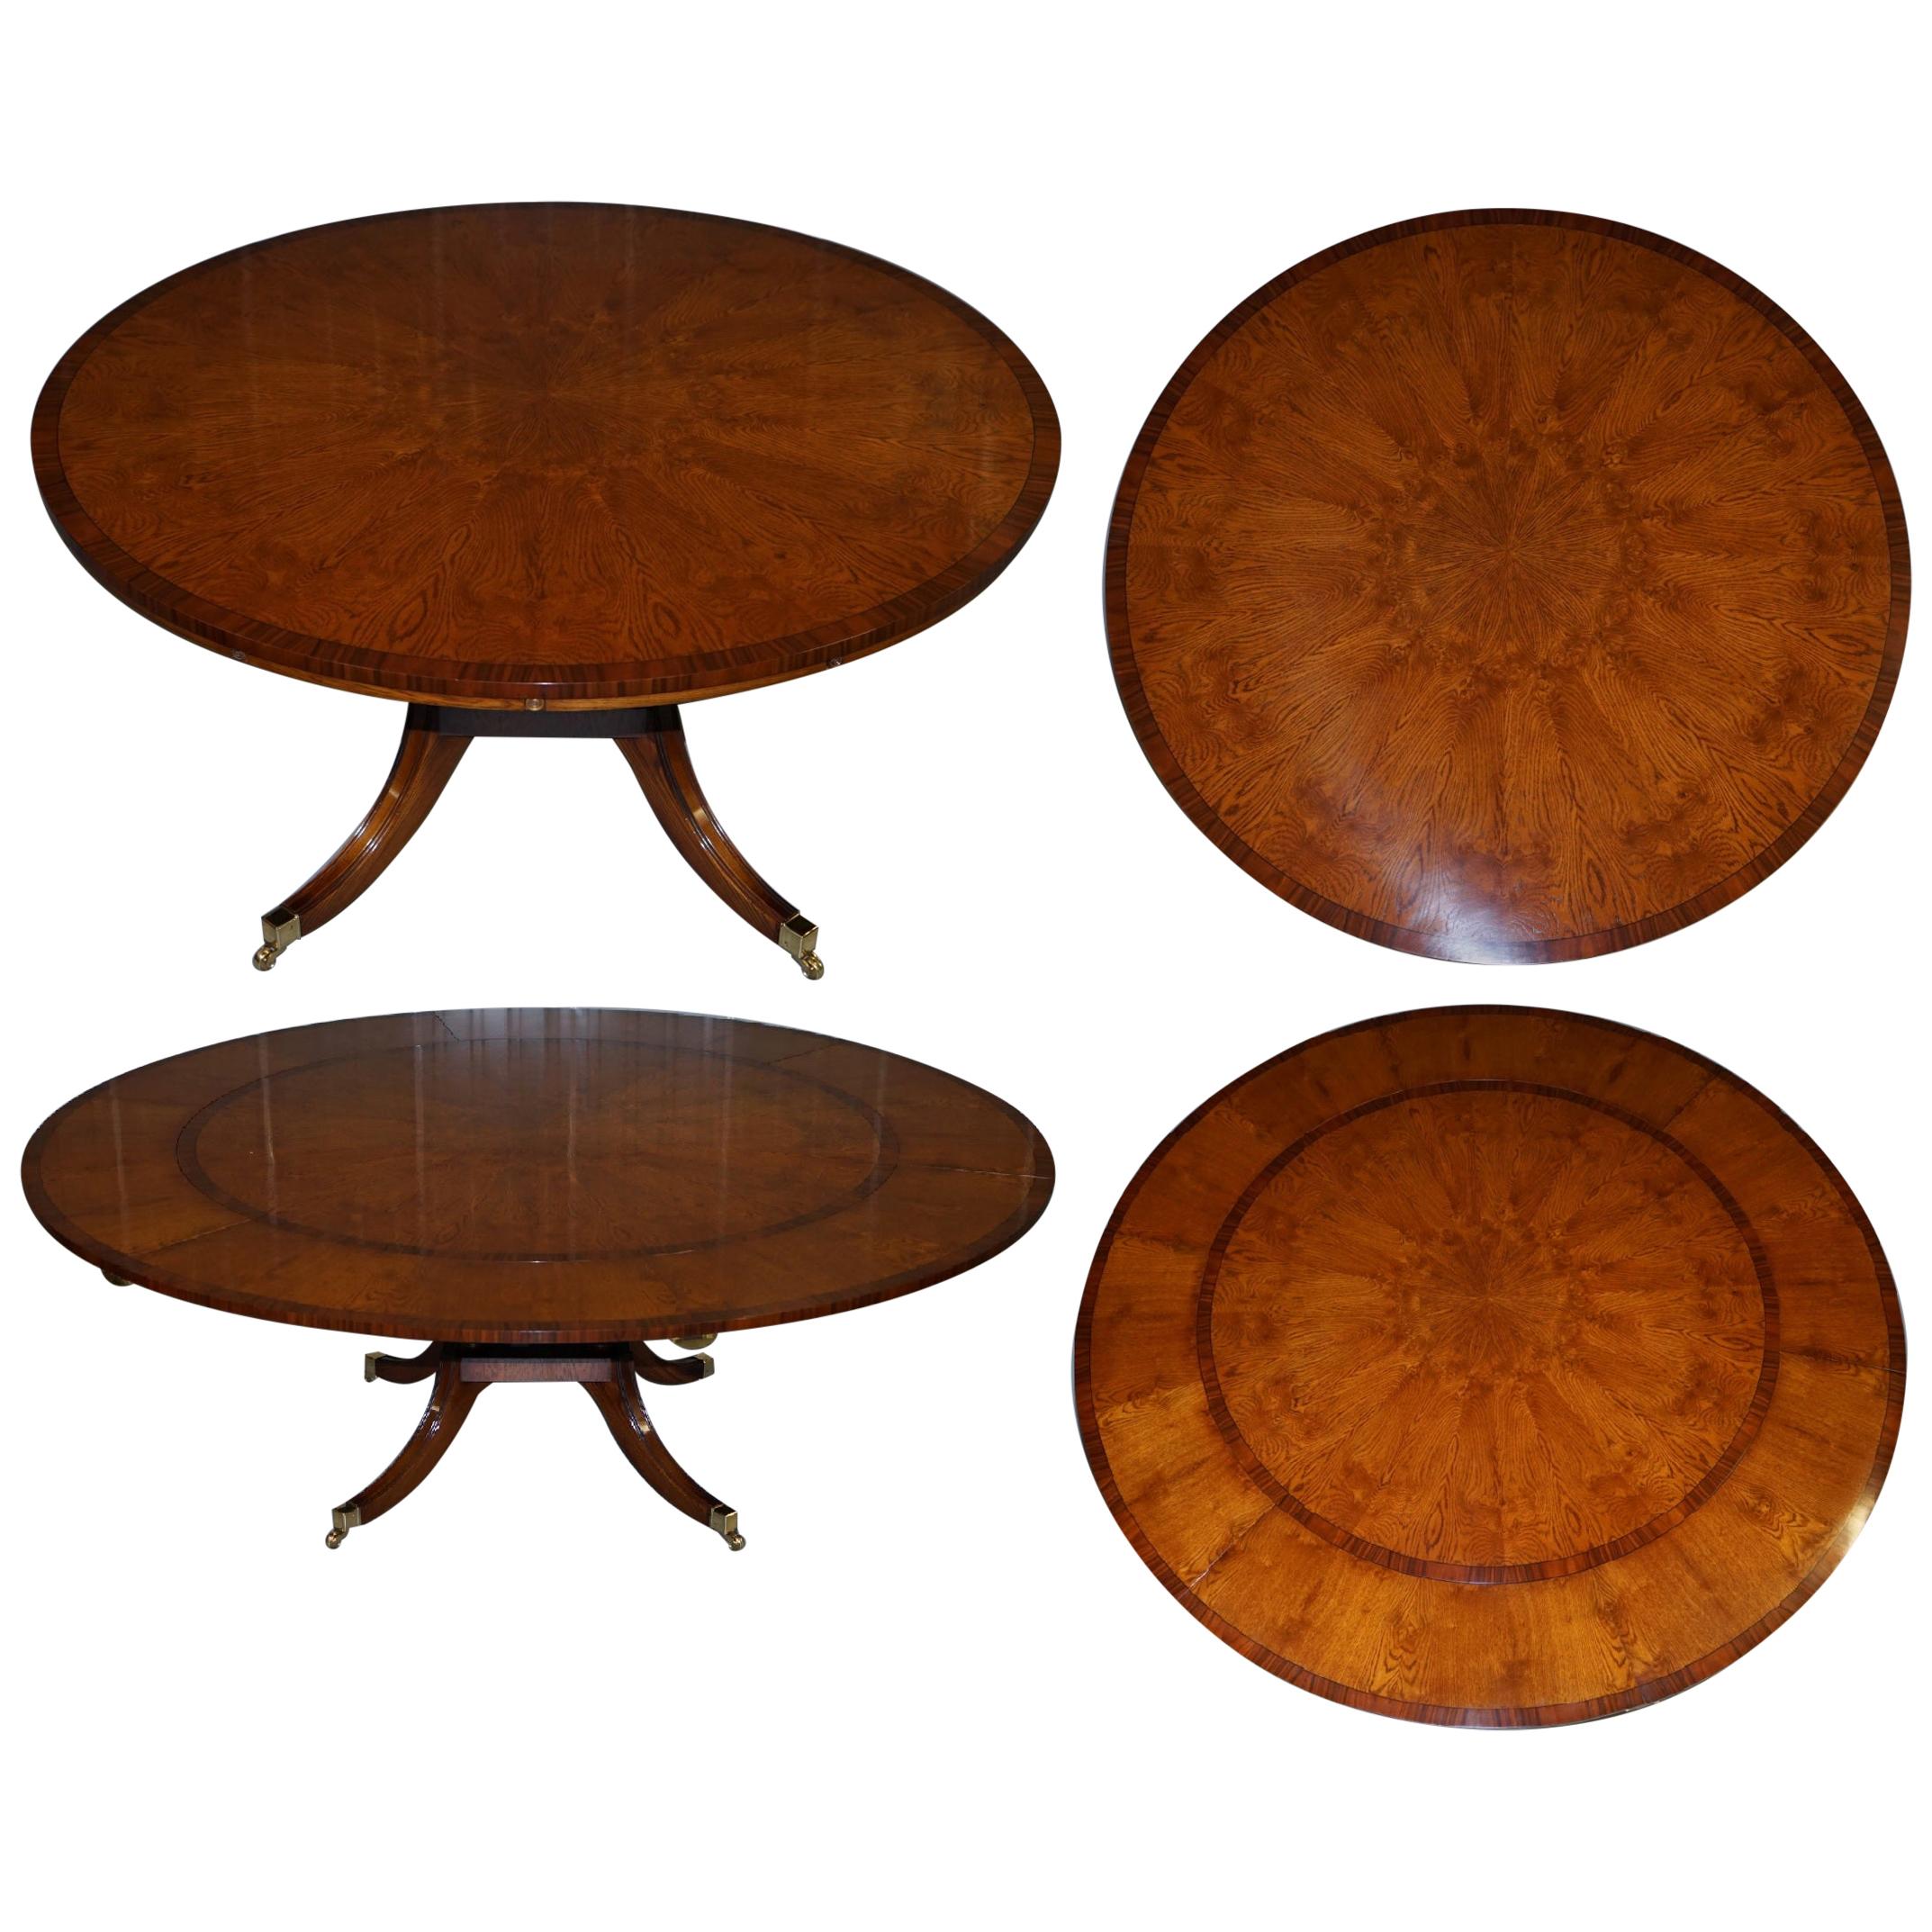 Brand New Cluster Oak Extending Jupe Round Dining Tables Seats 6-12 People